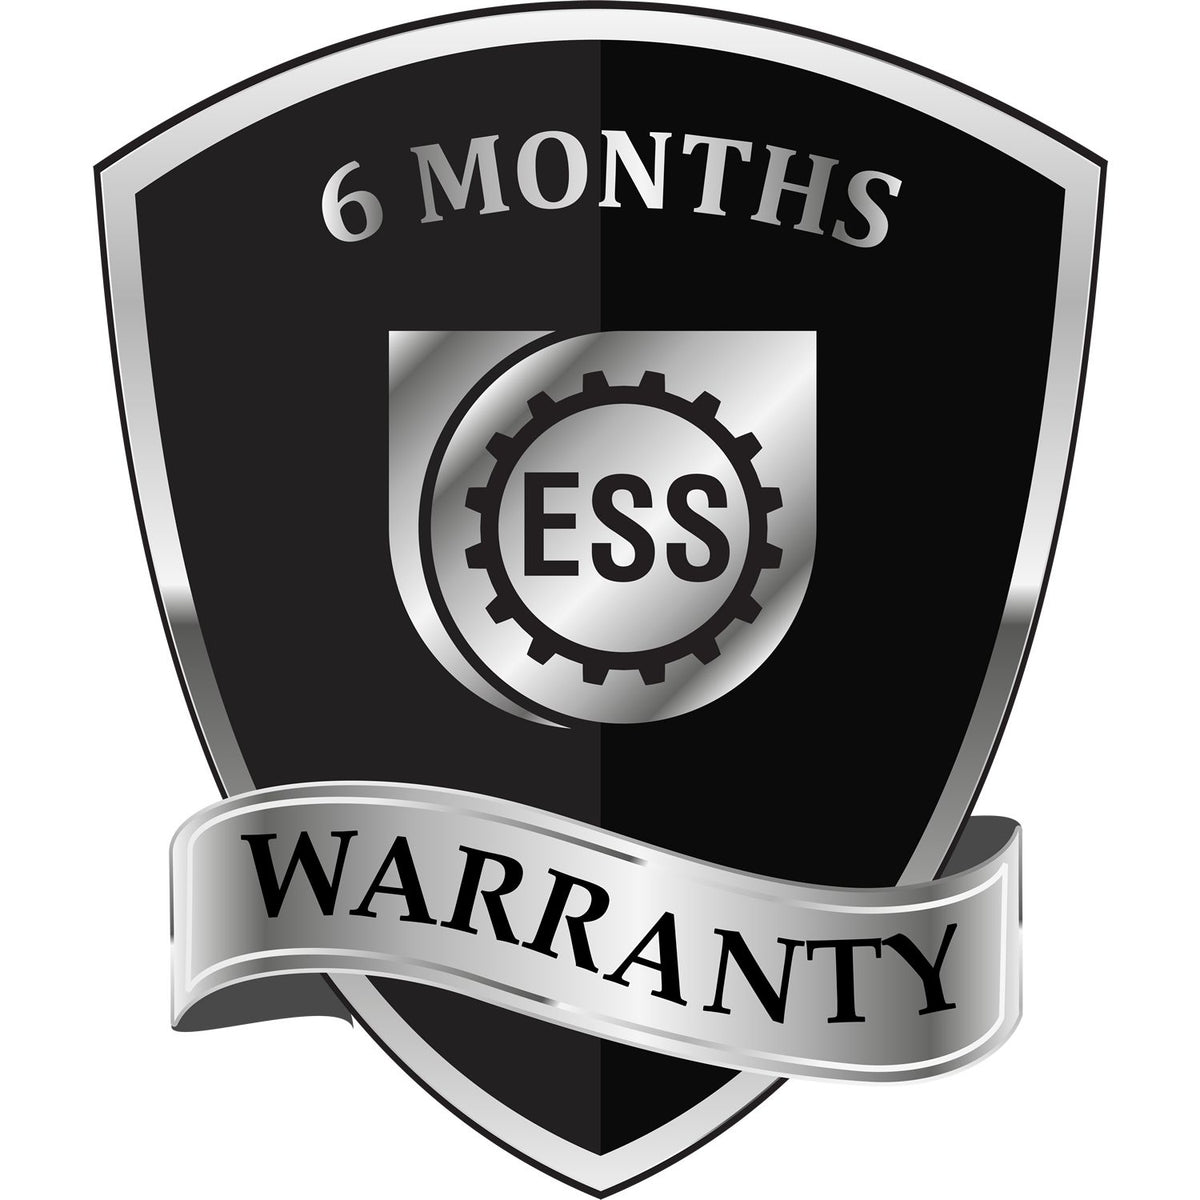 A badge or emblem showing a warranty icon for the Arkansas Professional Engineer Seal Stamp